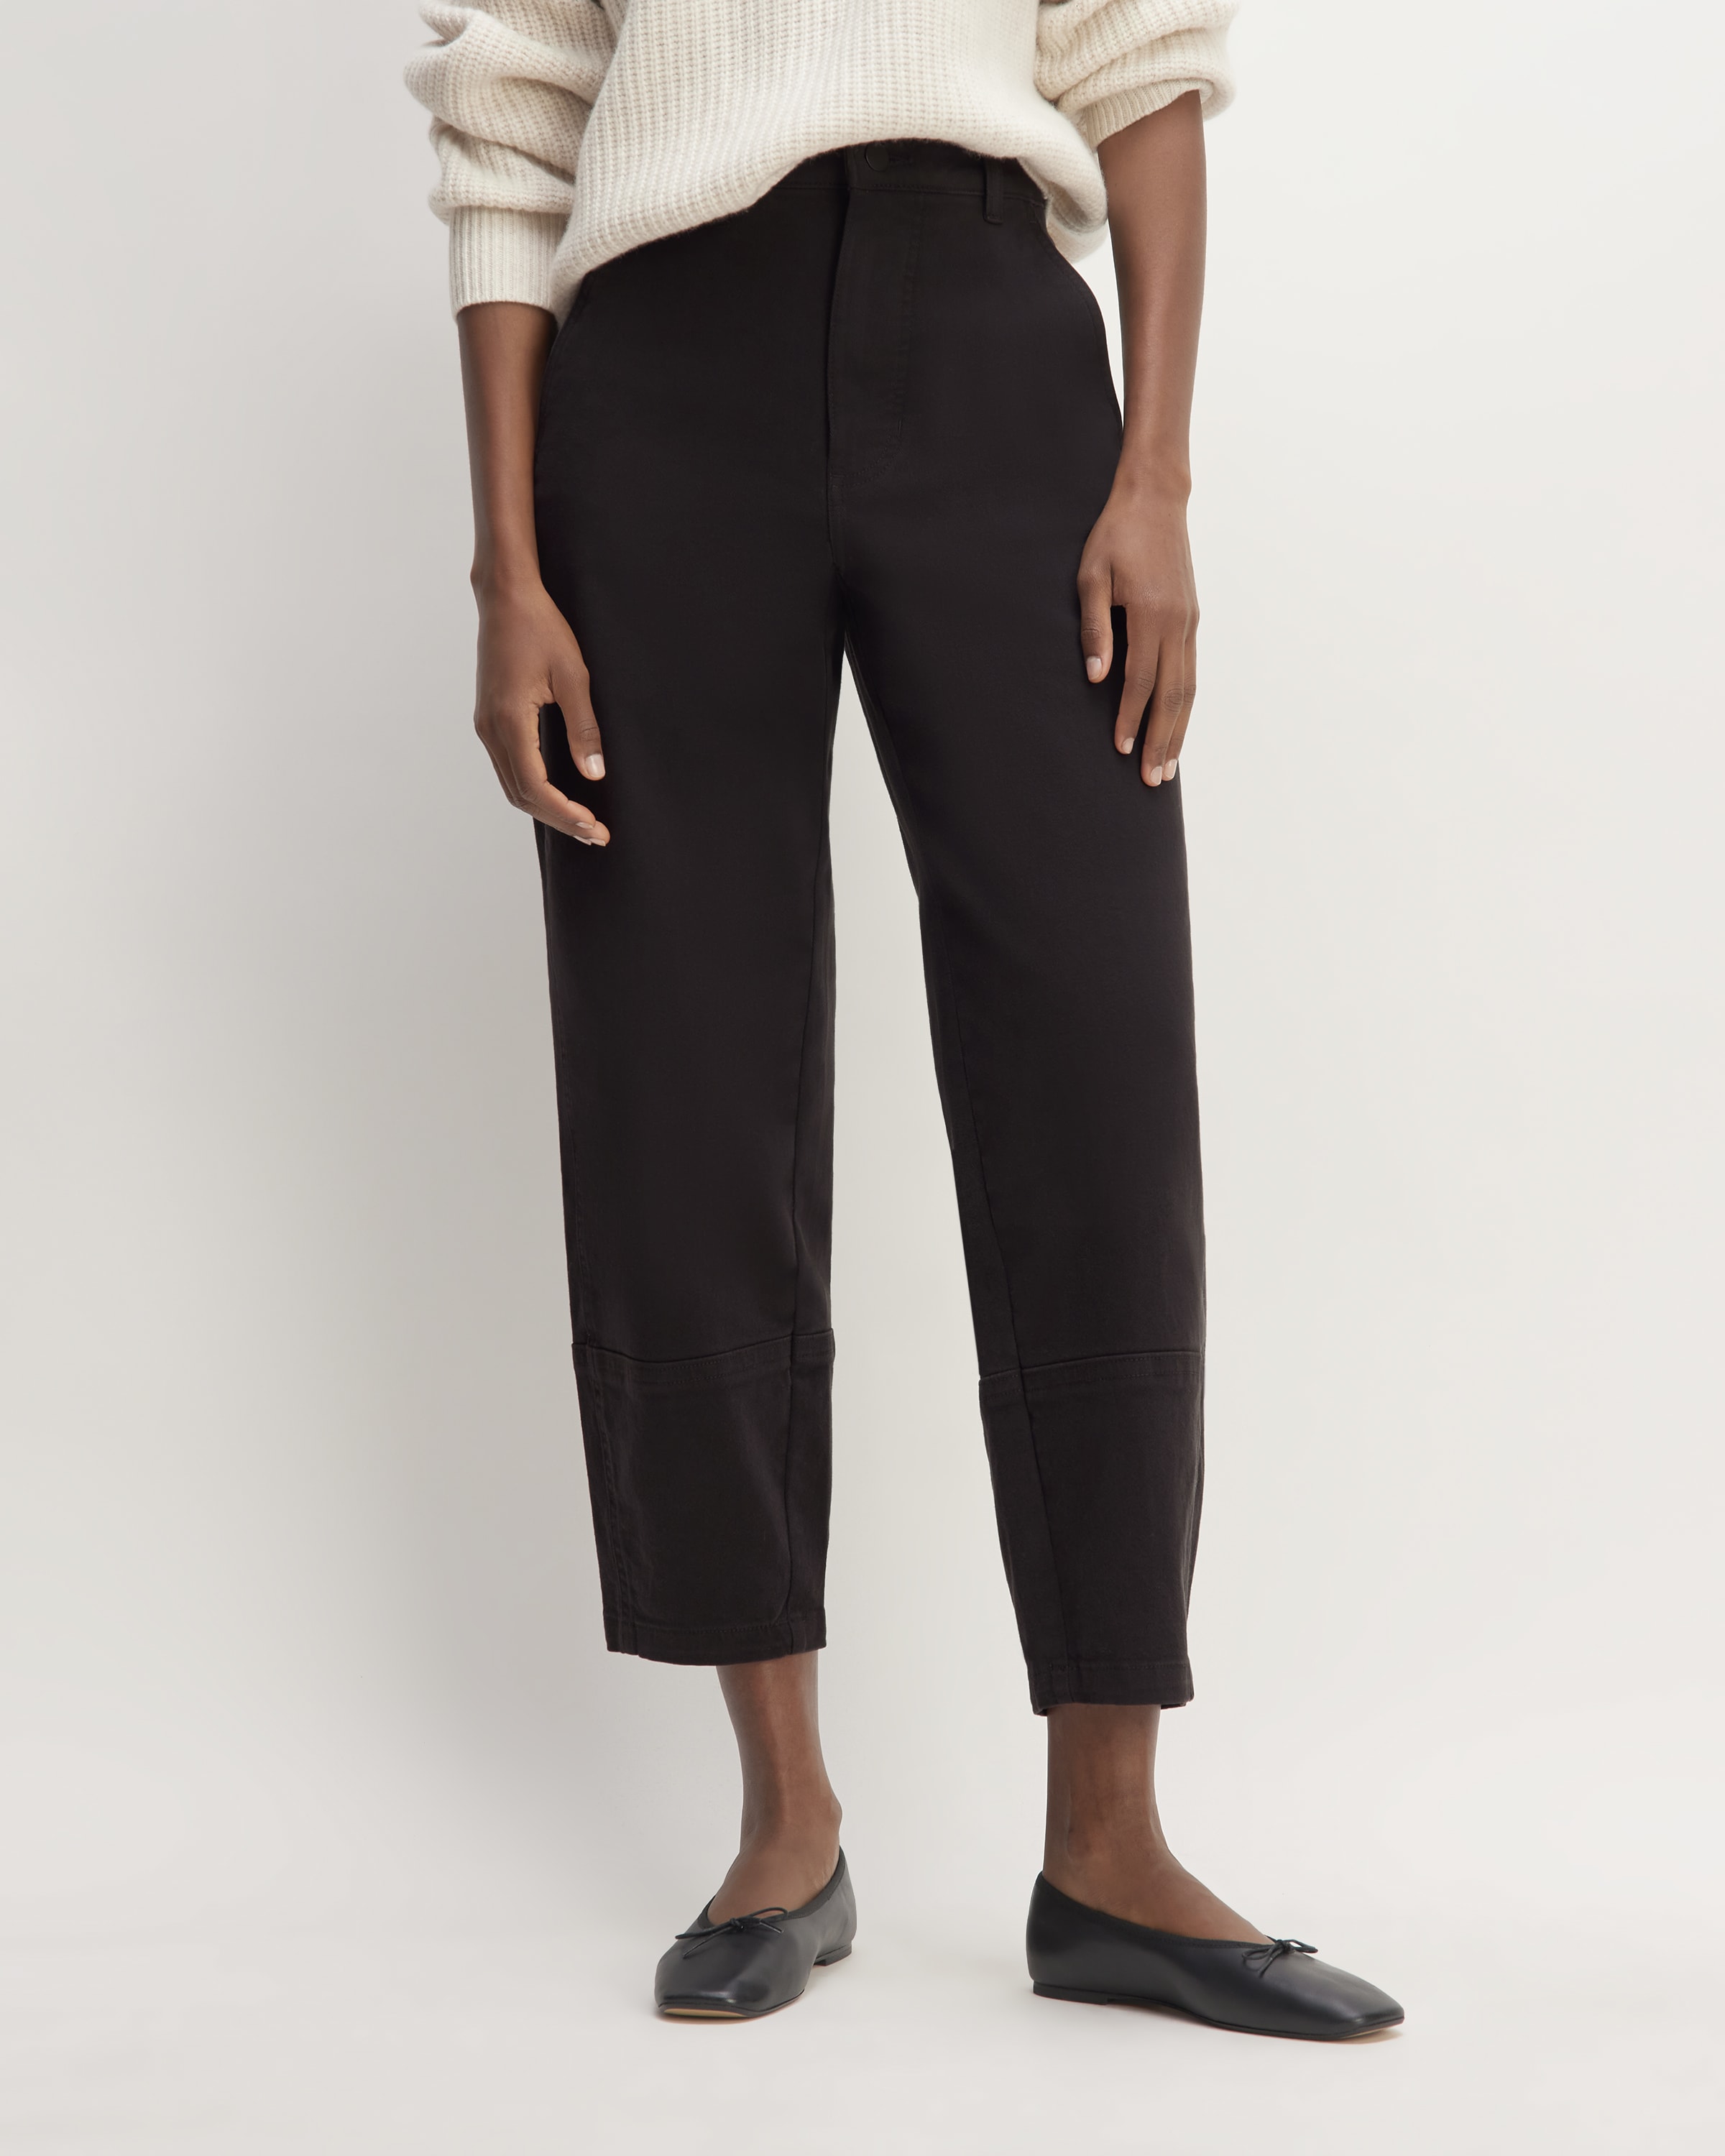 Everlane Women's Easy Pant in Black, Size Extra Small